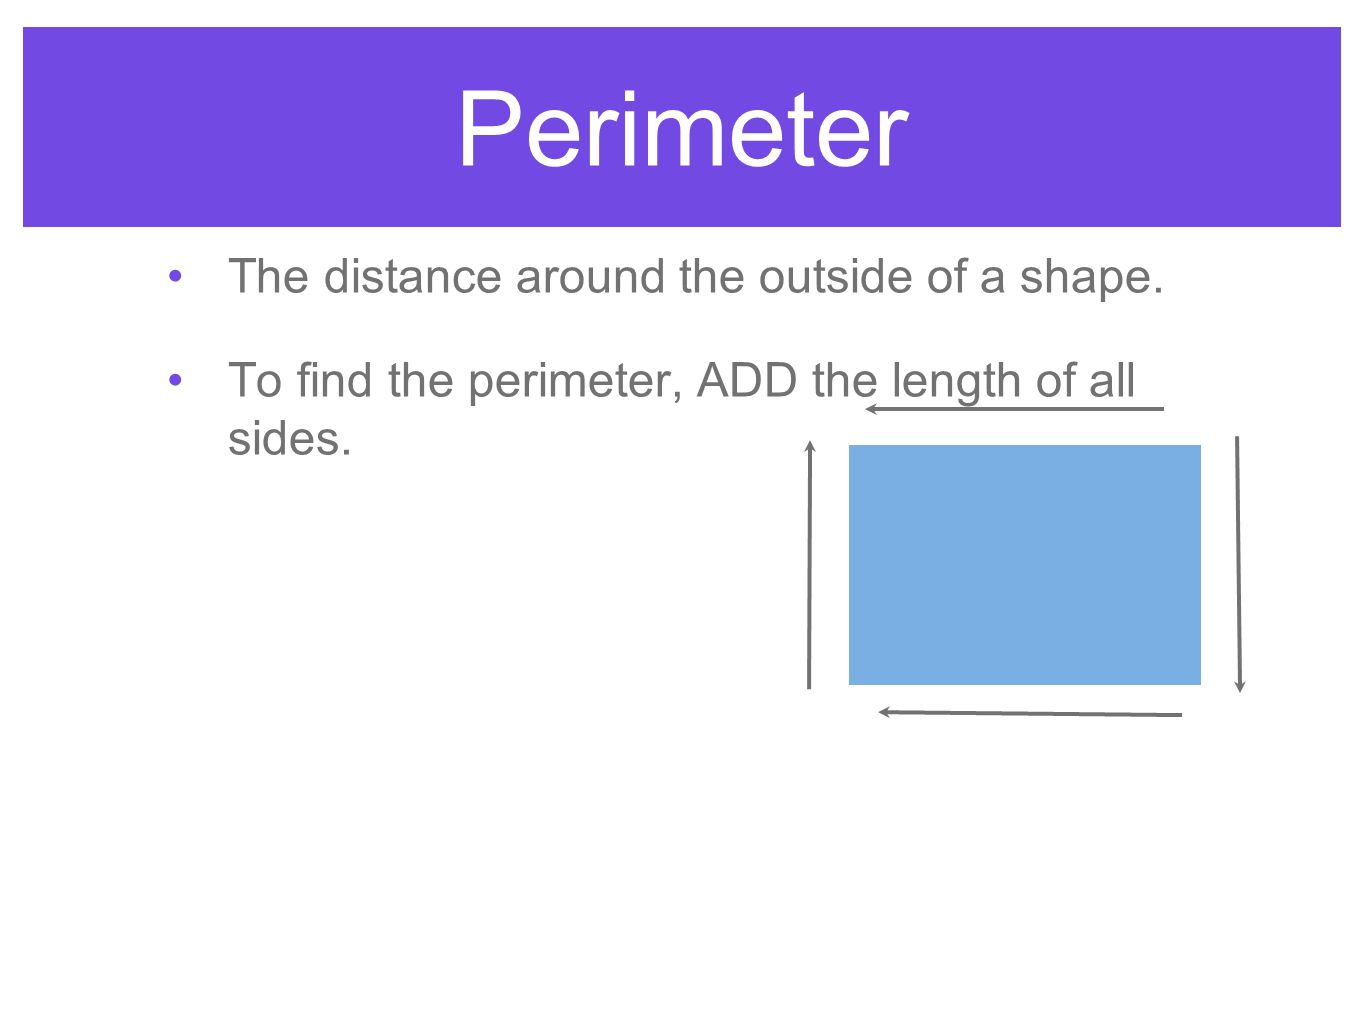 Perimeter The distance around the outside of a shape.